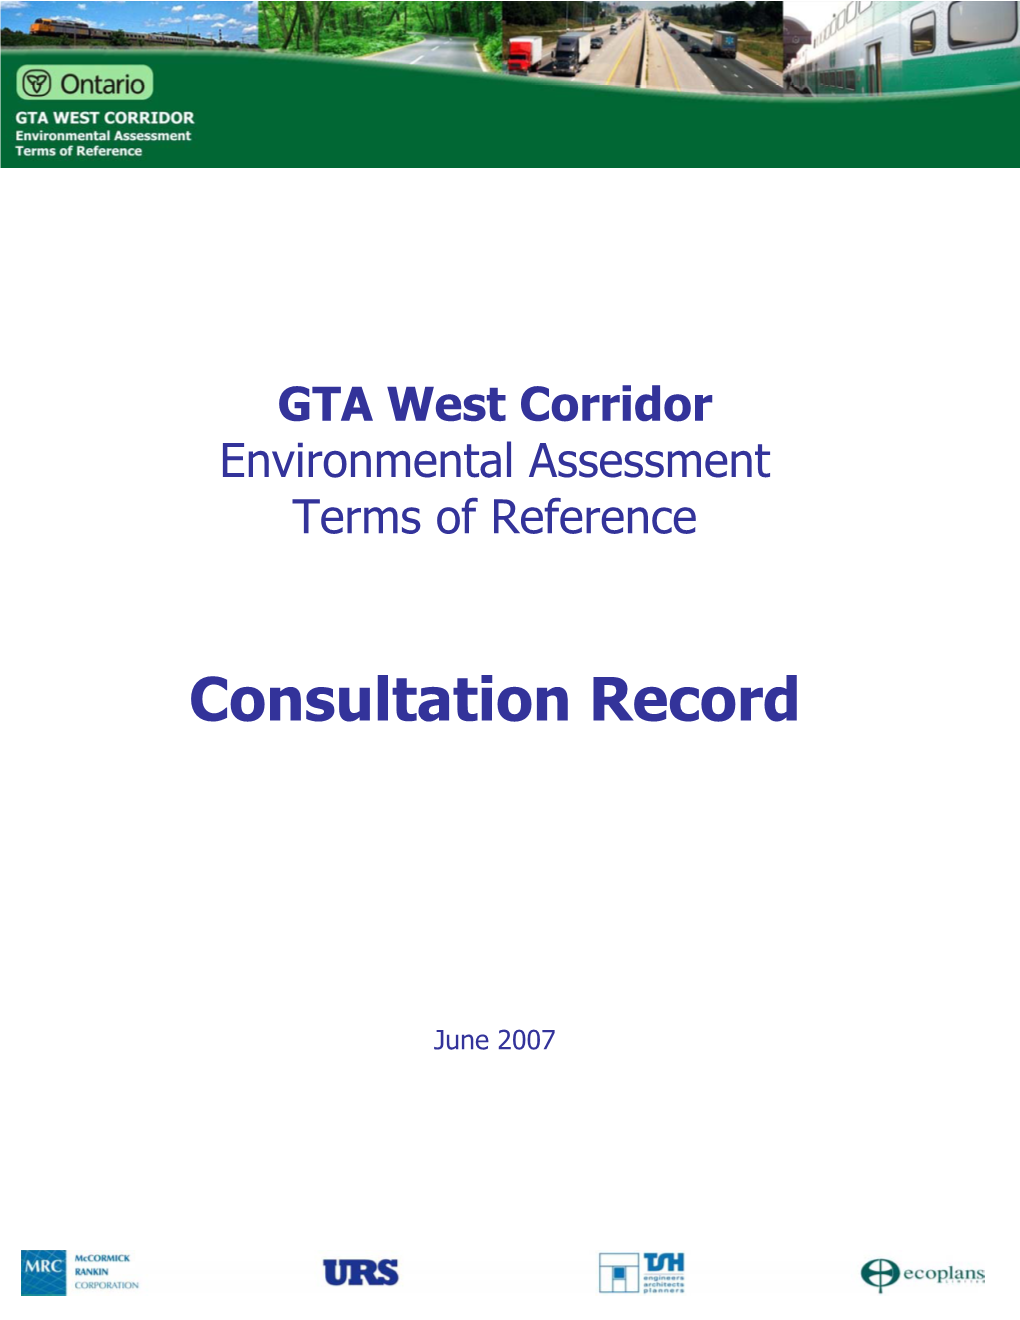 Terms of Reference Consultation Record